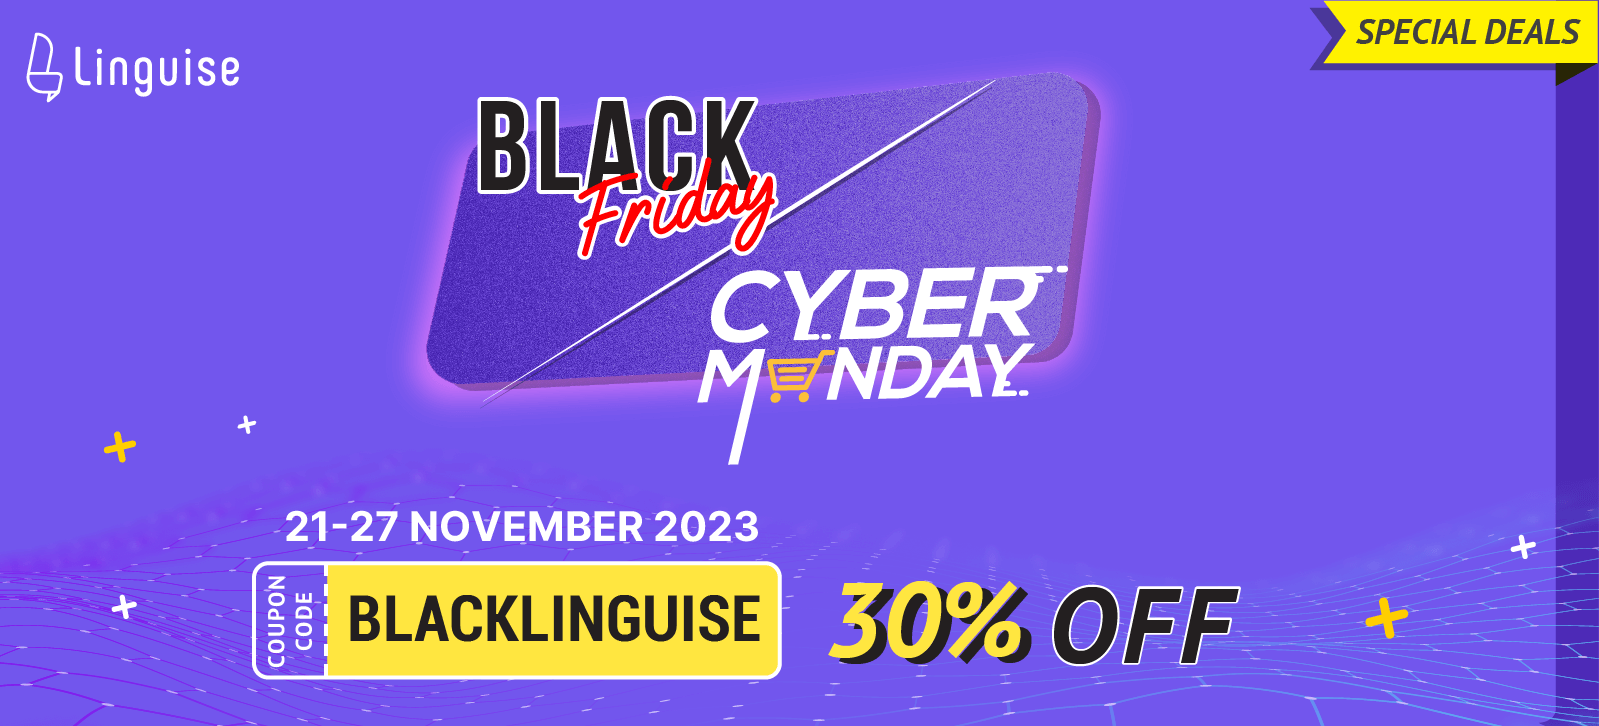 Exciting WordPress Black Friday deals with Cyber Monday offers from Linguise for 2023